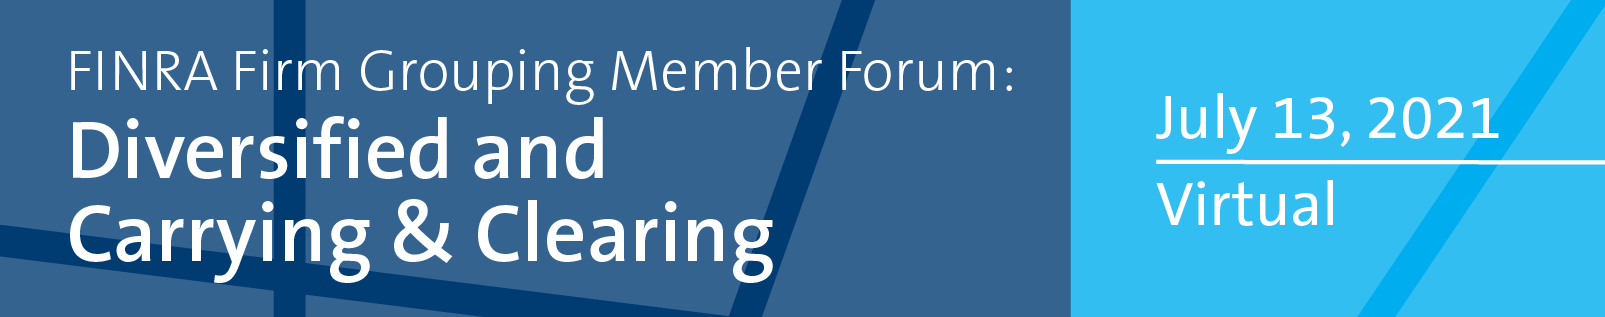 2021 FINRA Firm Grouping Member Forum: Diversified and Carrying & Clearing